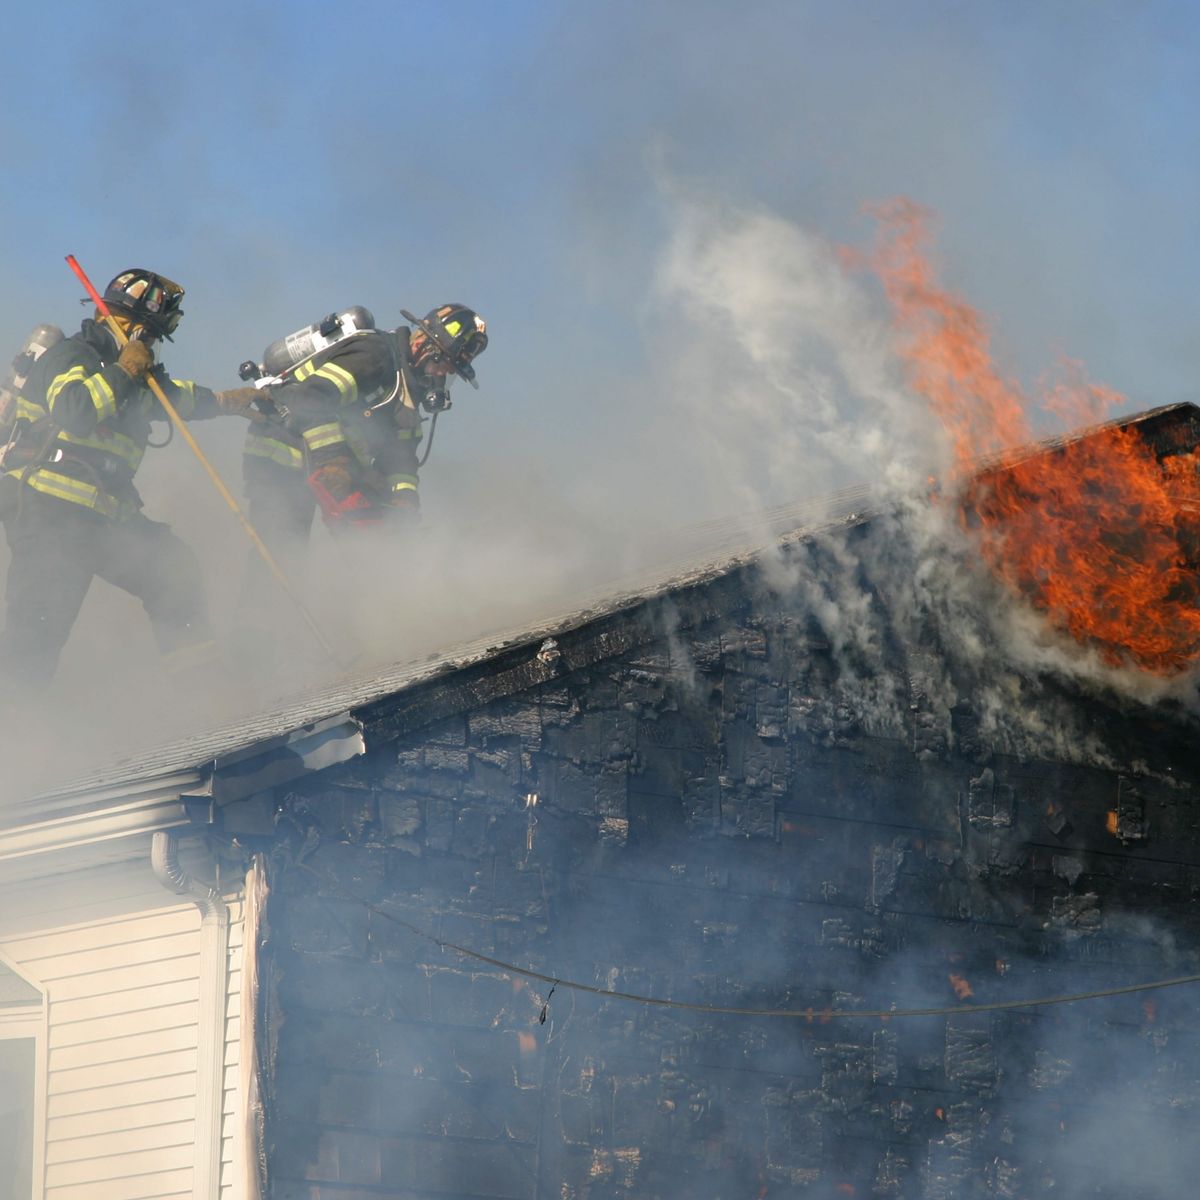 Photo of firefighters battling a residential fire